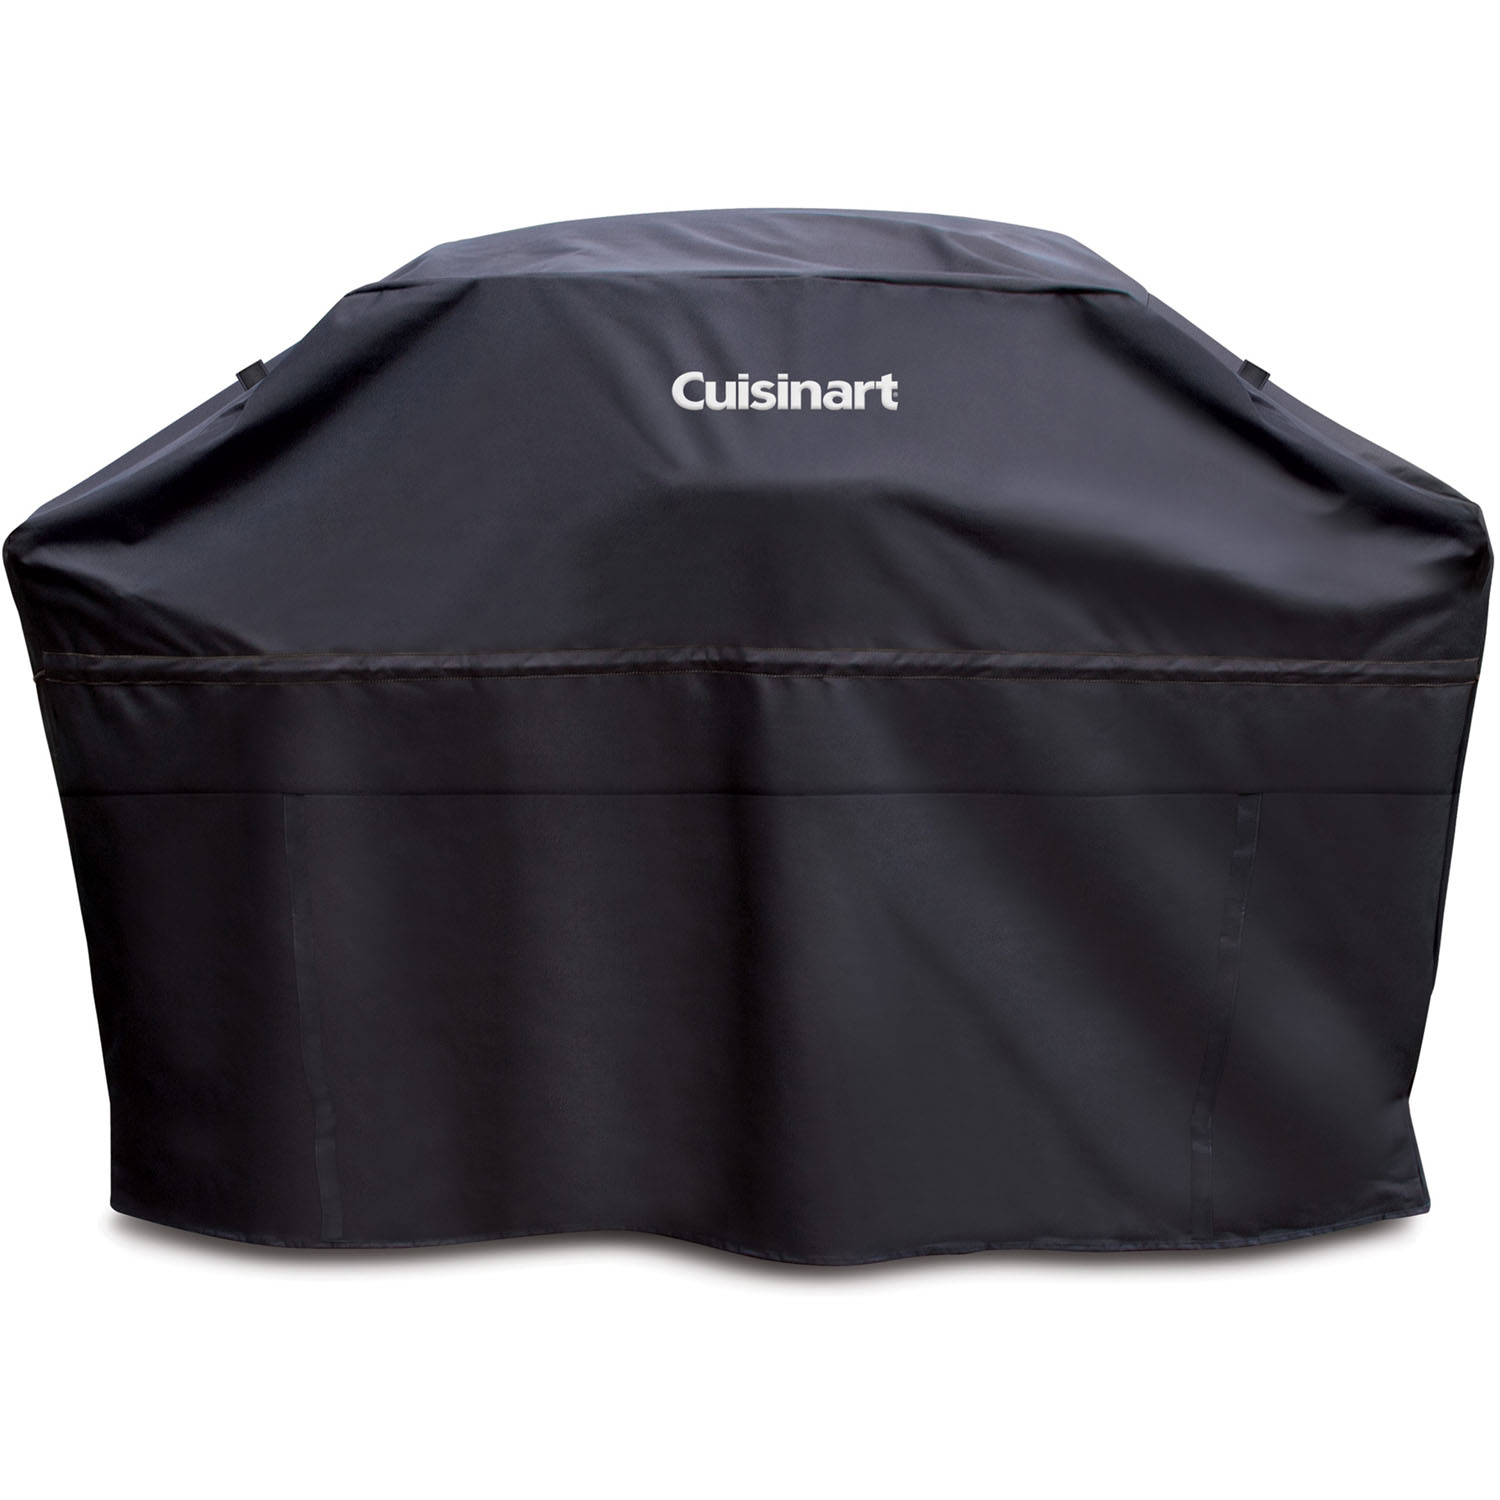 Cuisinart 60-In. Heavy-Duty Rectangular Grill Cover in Black - image 1 of 11